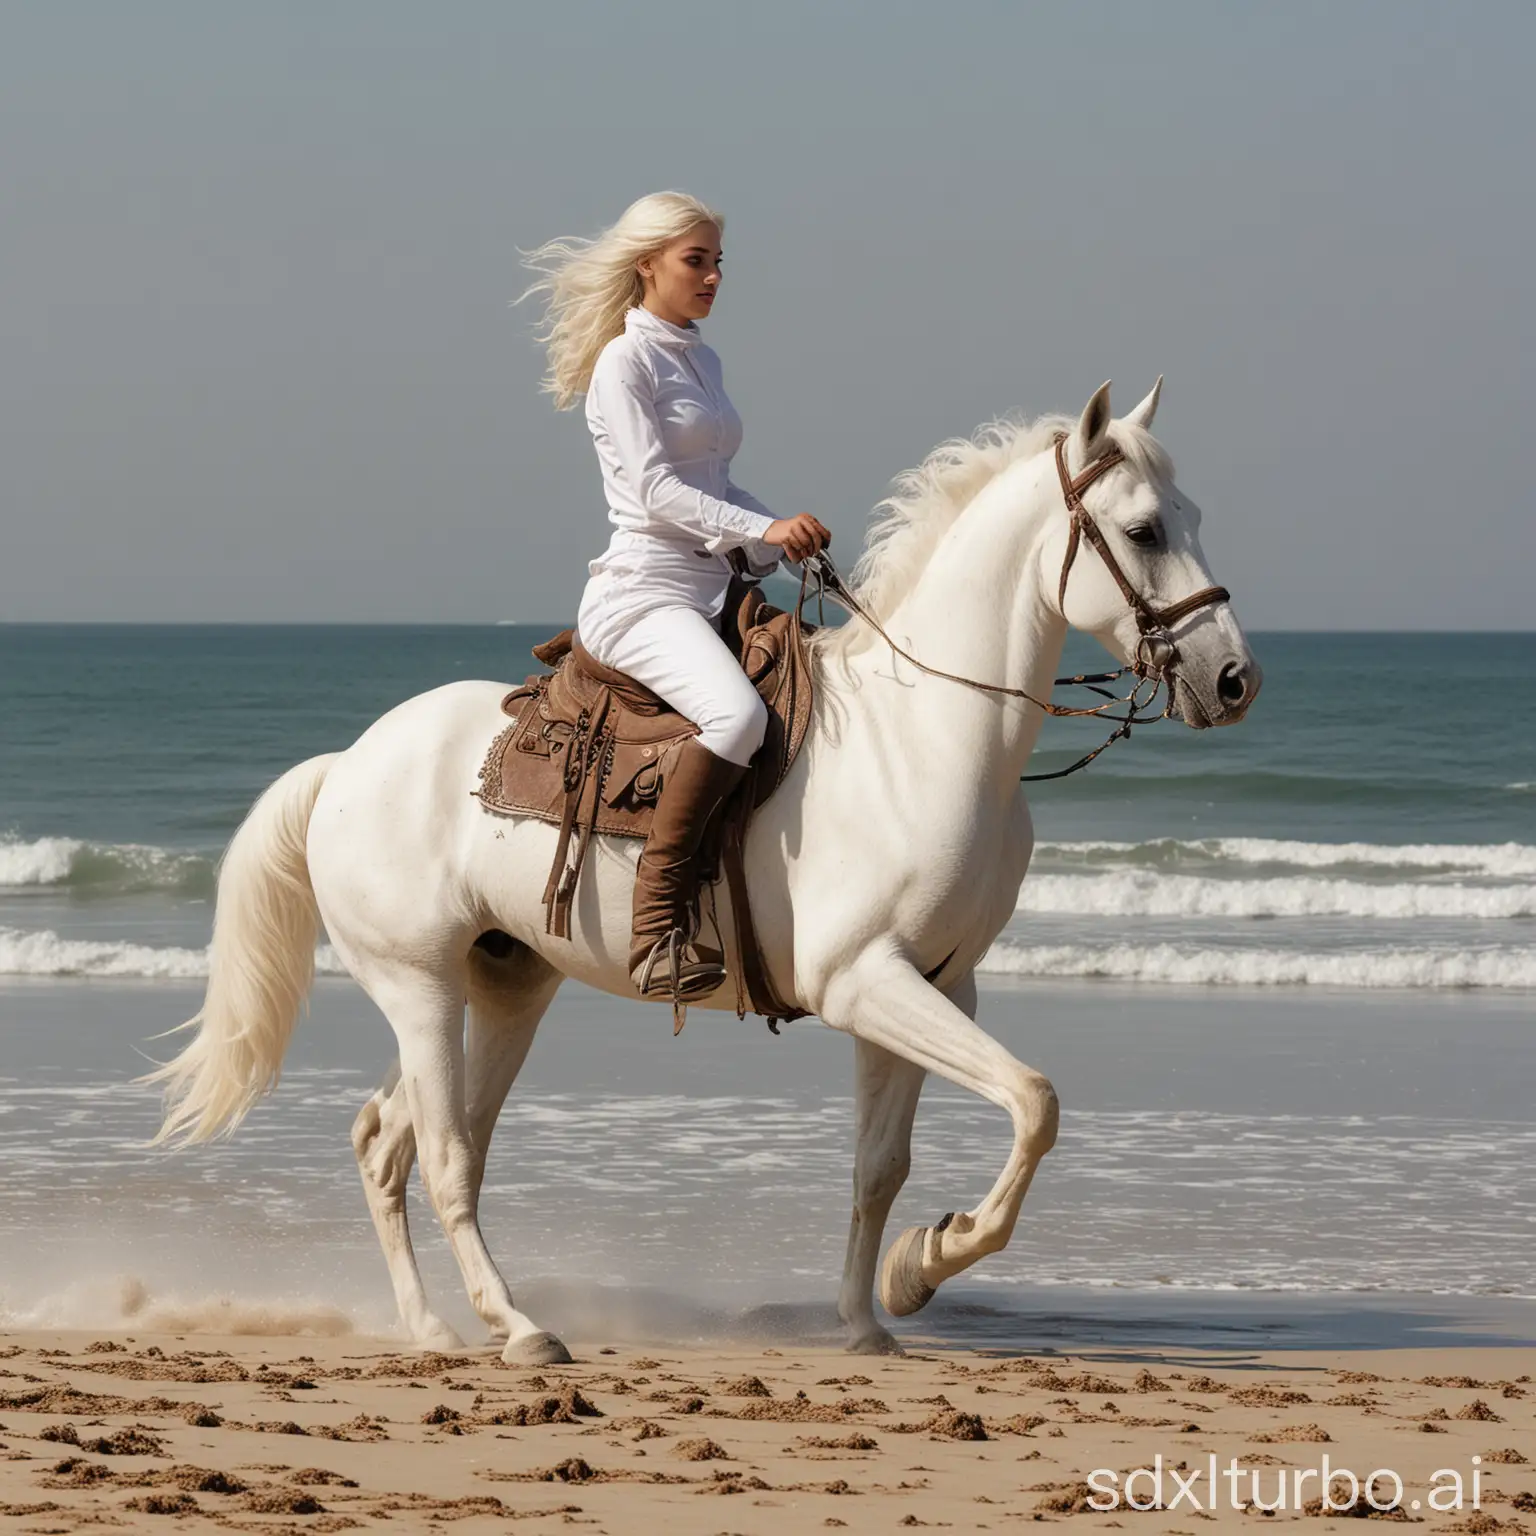 Wild rider on a white Arabian steed at the sandy beach of the churned sea